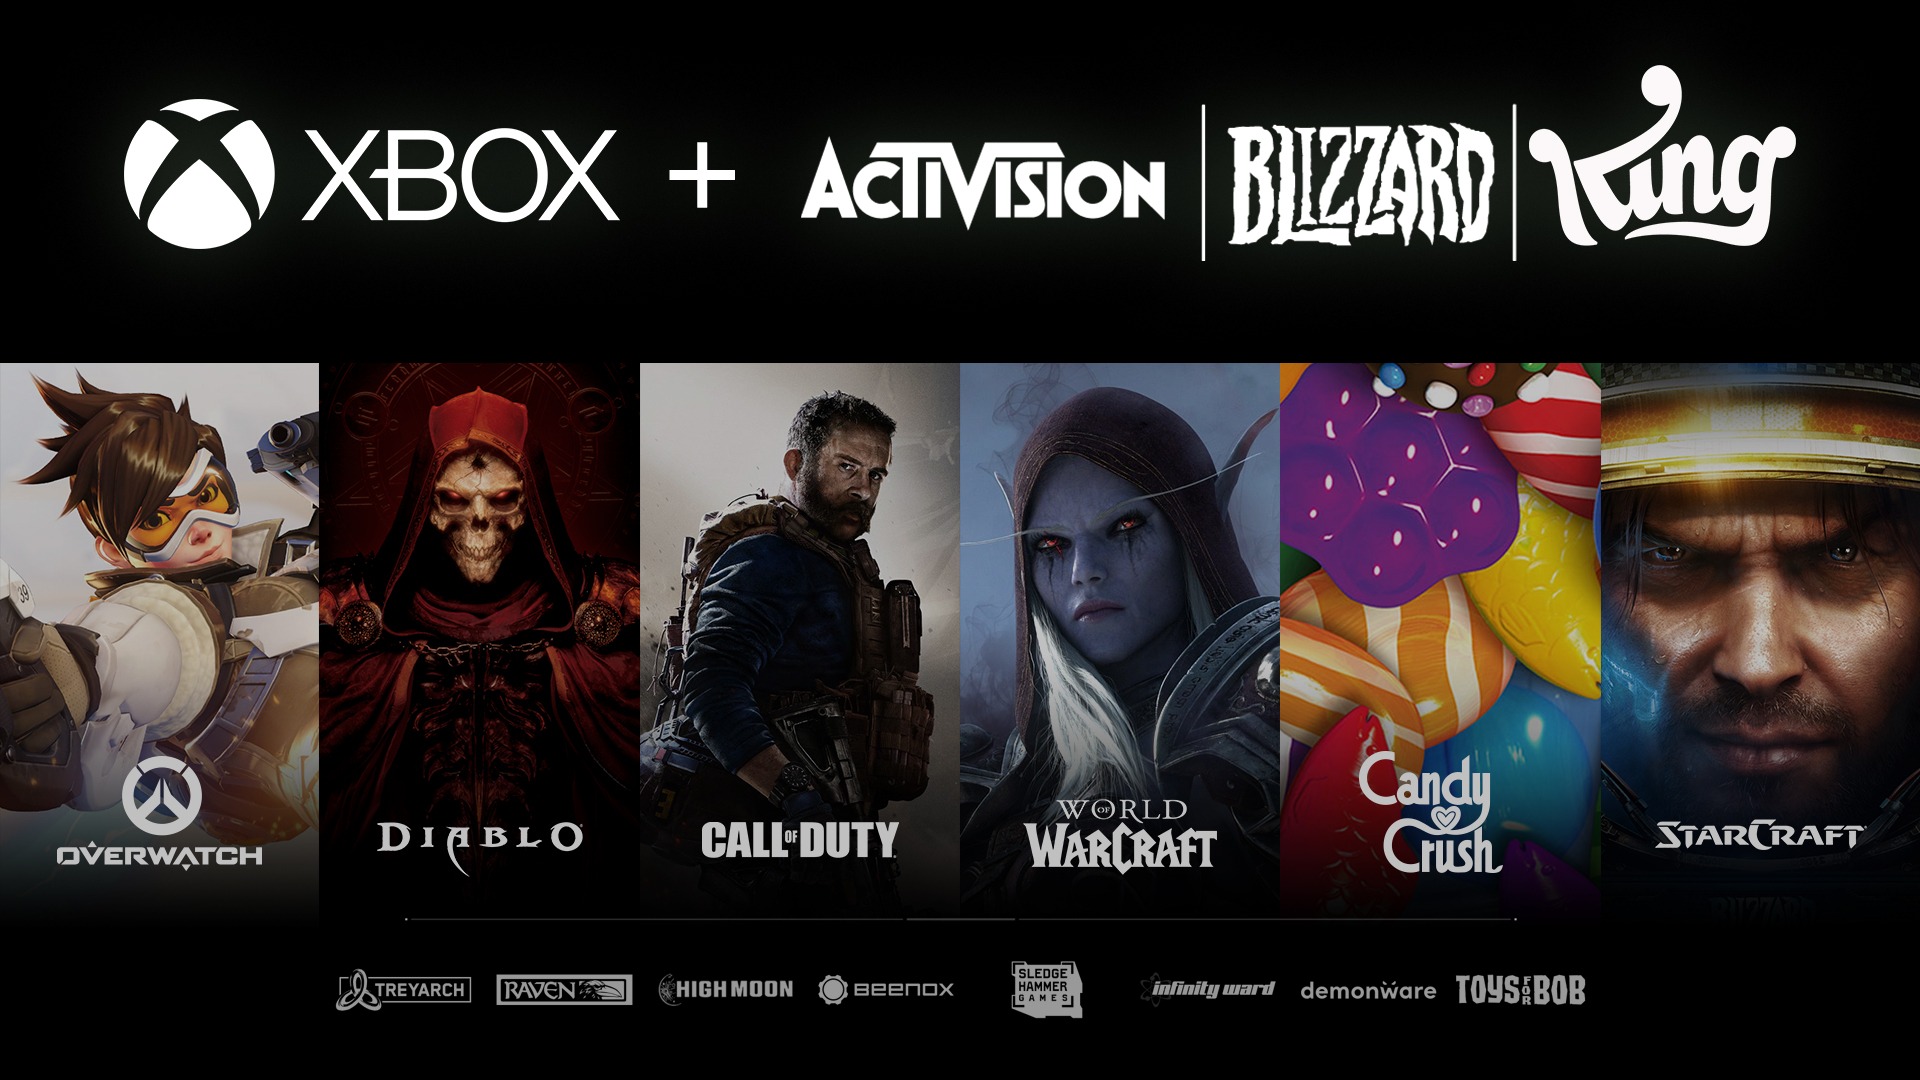 Xbox announces it is acquiring Activision Blizzard and all studios